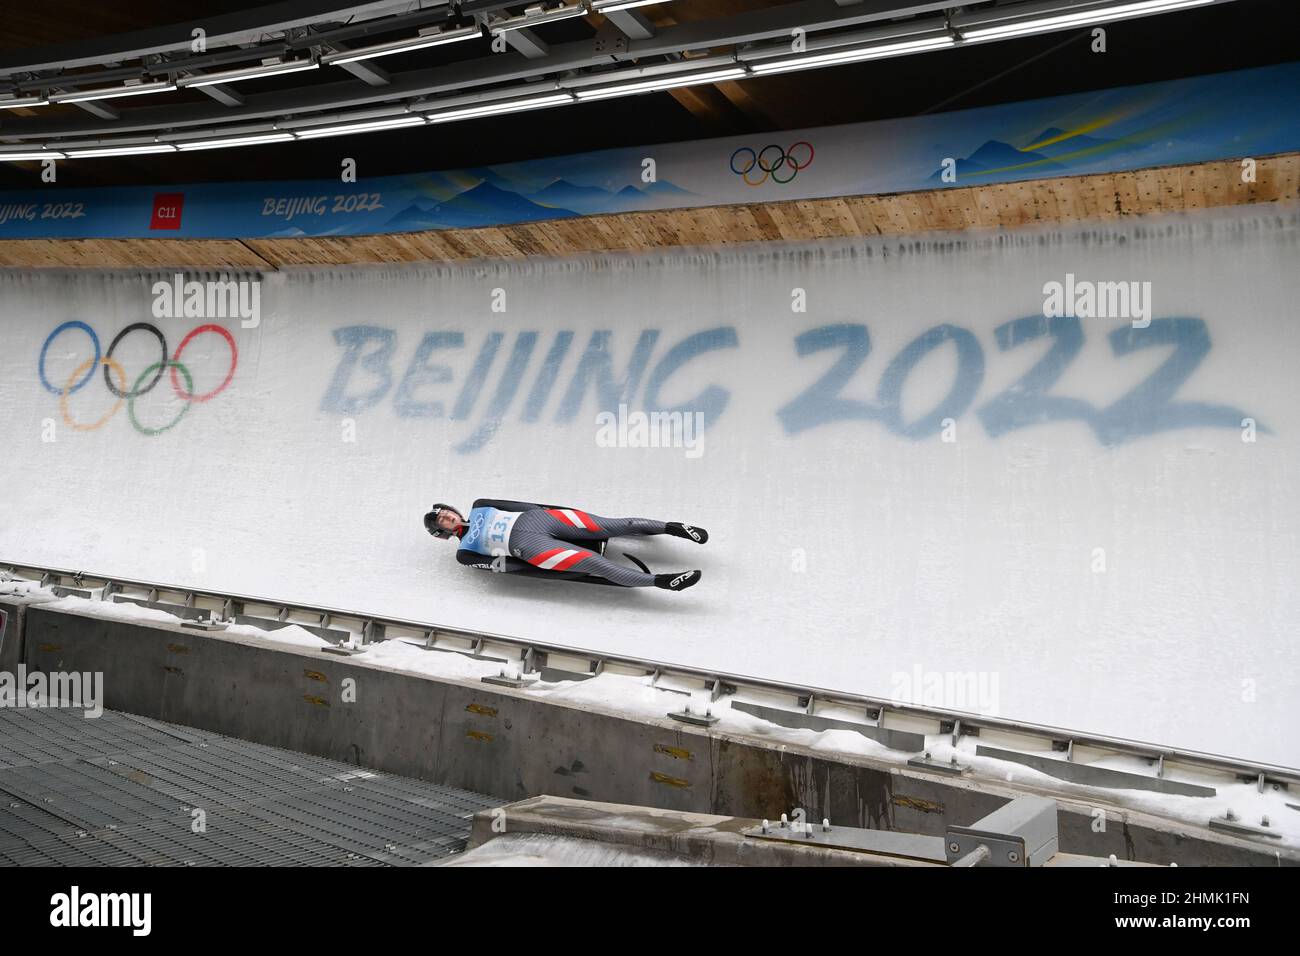 Beijing, China. 10th Feb, 2022. Madeleine Egle of Austria competes during the luge team relay competition?at the Yanqing?National Sliding Centre in Yanqing?district of Beijing, capital of China, Feb. 10, 2022. Credit: Sun Fei/Xinhua/Alamy Live News Stock Photo